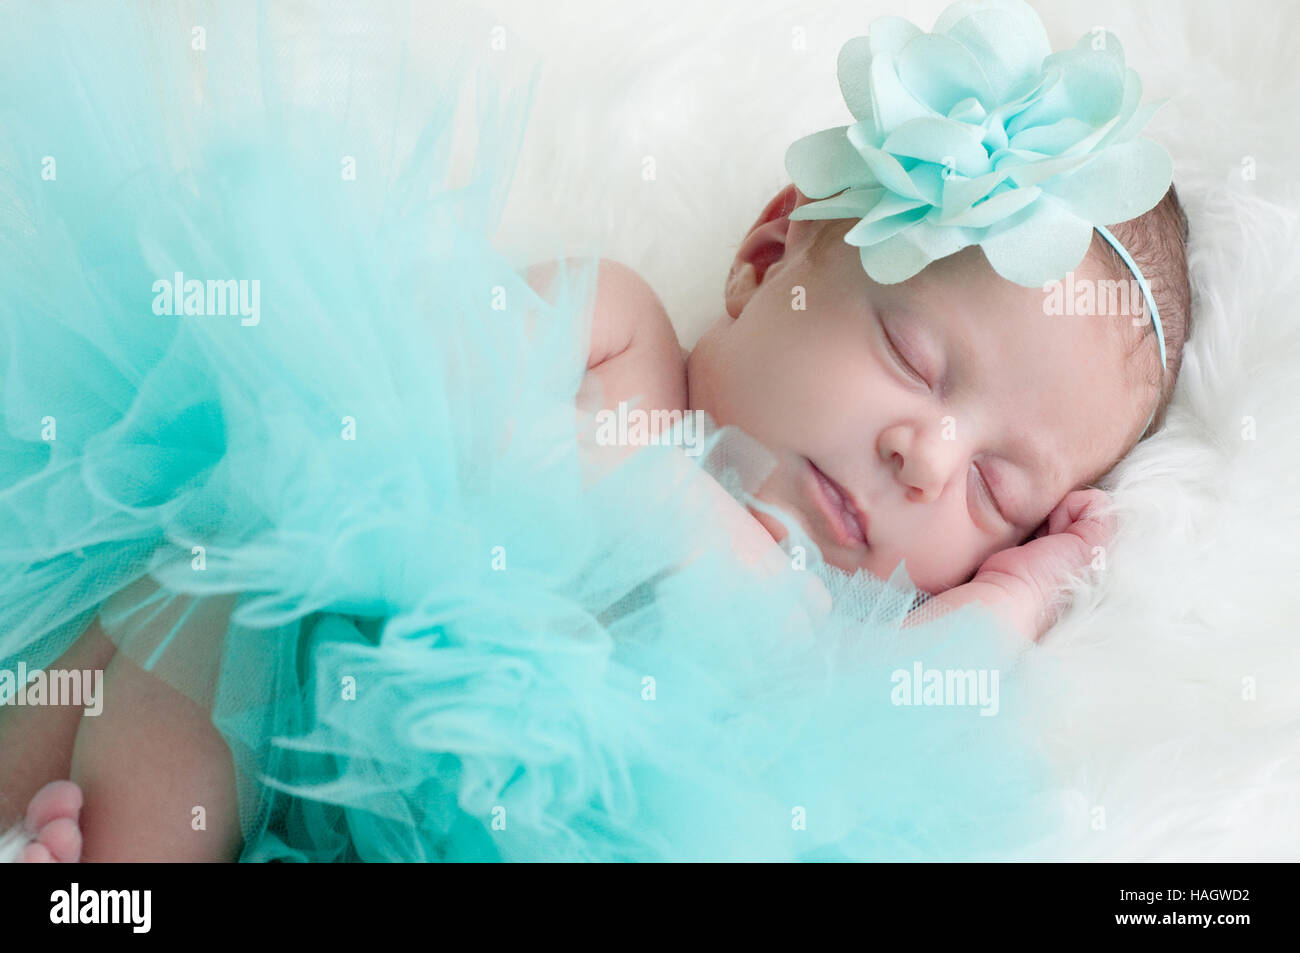 Precious baby girl sleeping in teal outfit laying on white fur. Stock Photo